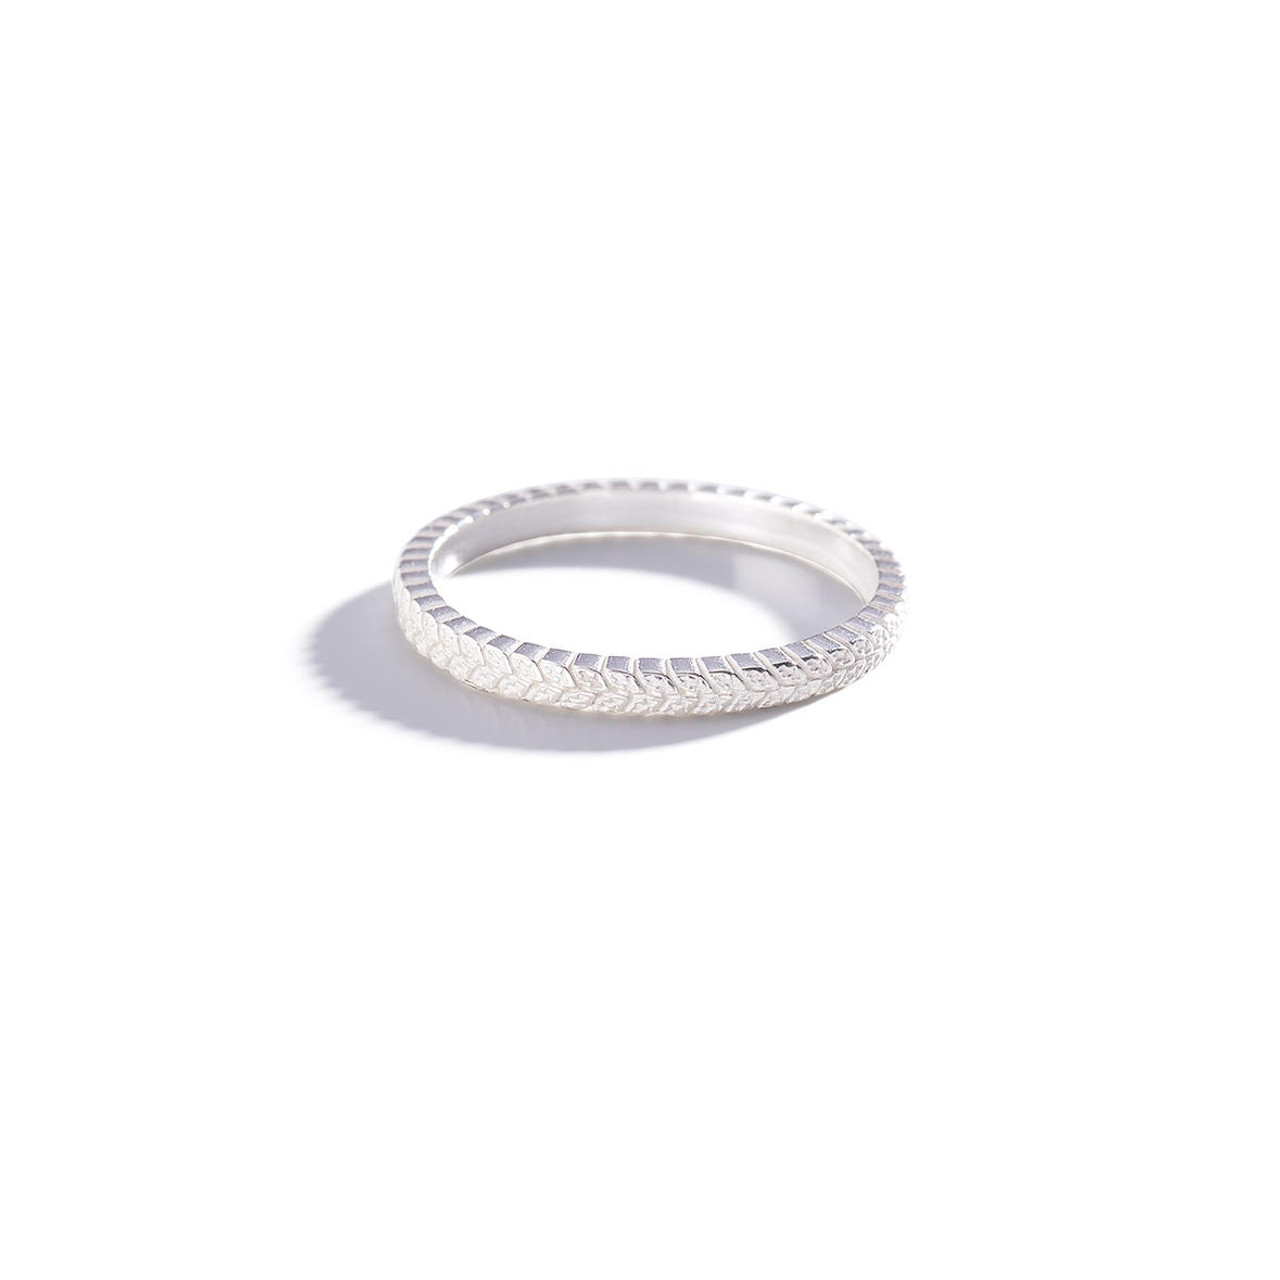 Set of Three 925 Sterling Silver Stack Rings